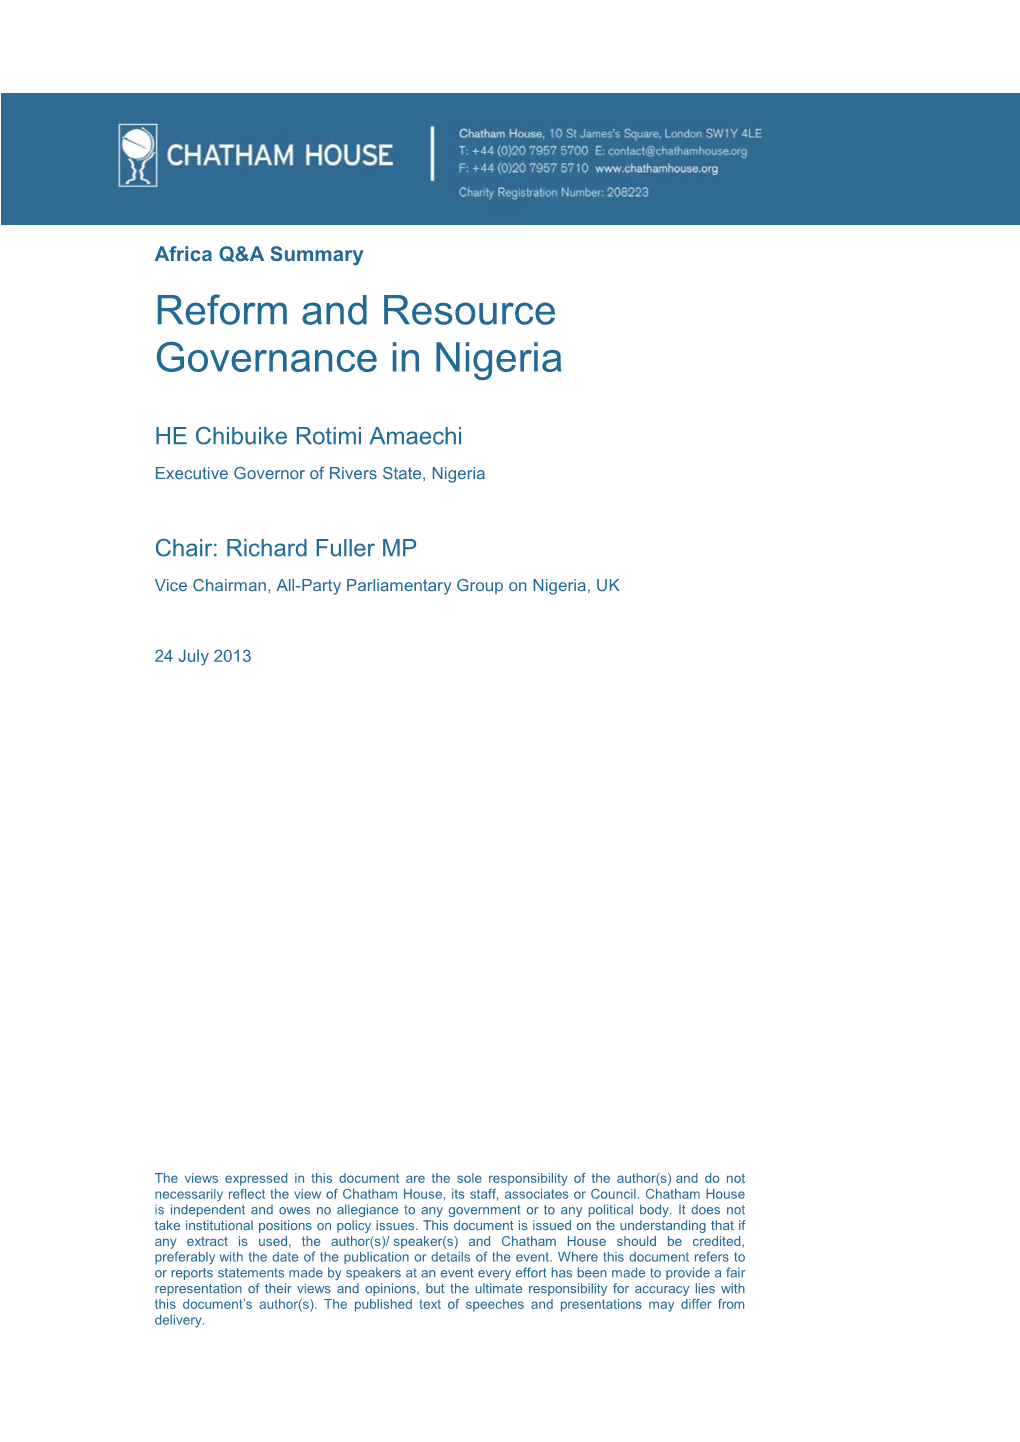 Reform and Resource Governance in Nigeria